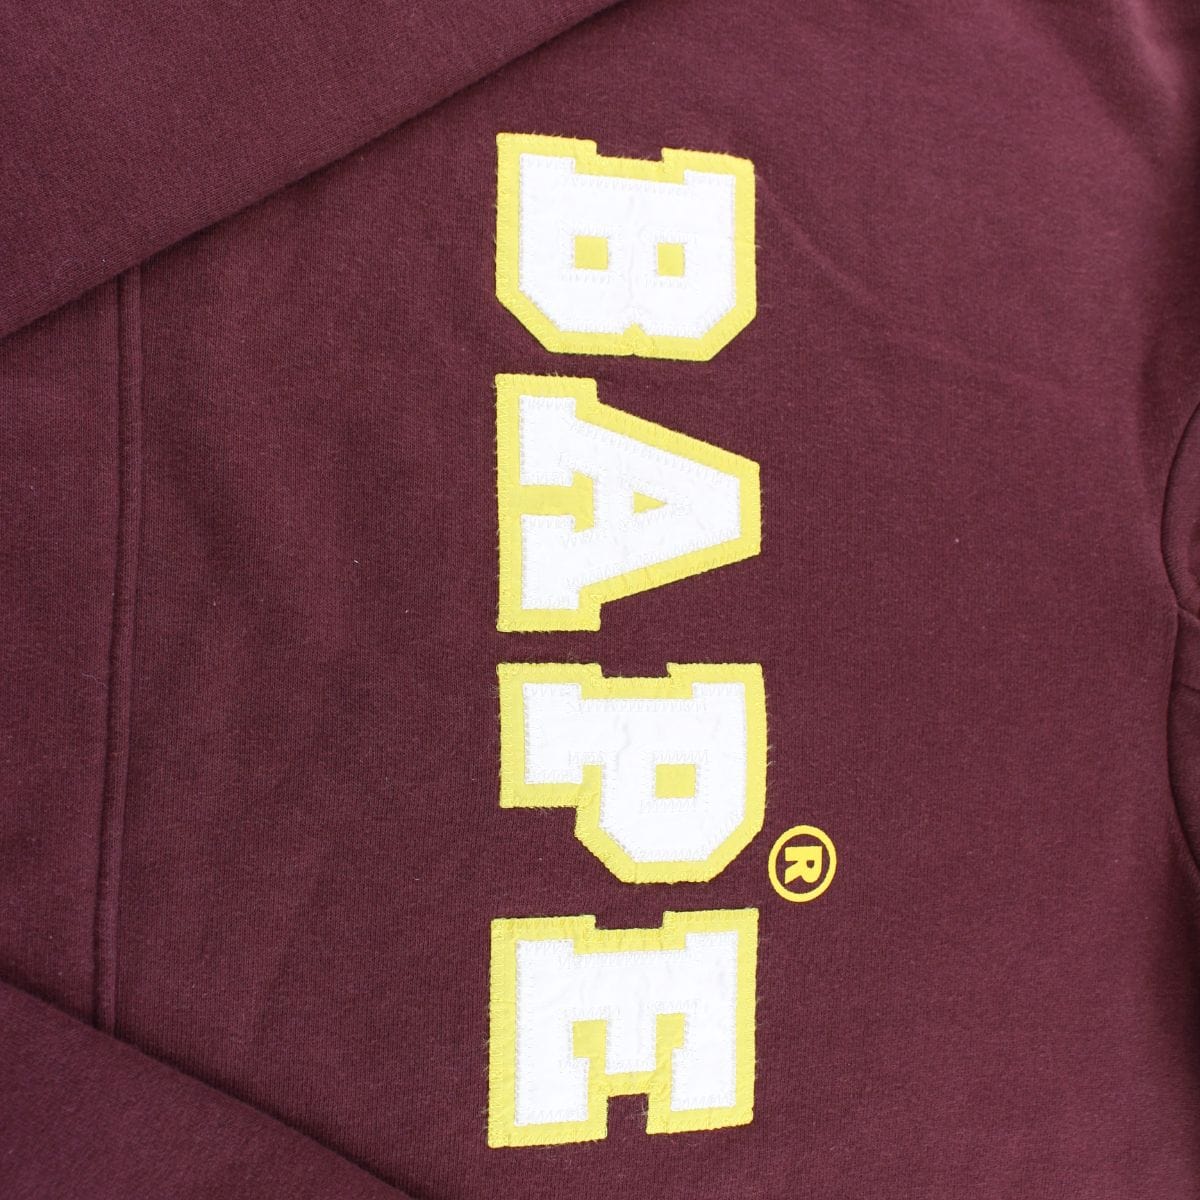 bape embroidered spellout hoodie brown - SaruGeneral